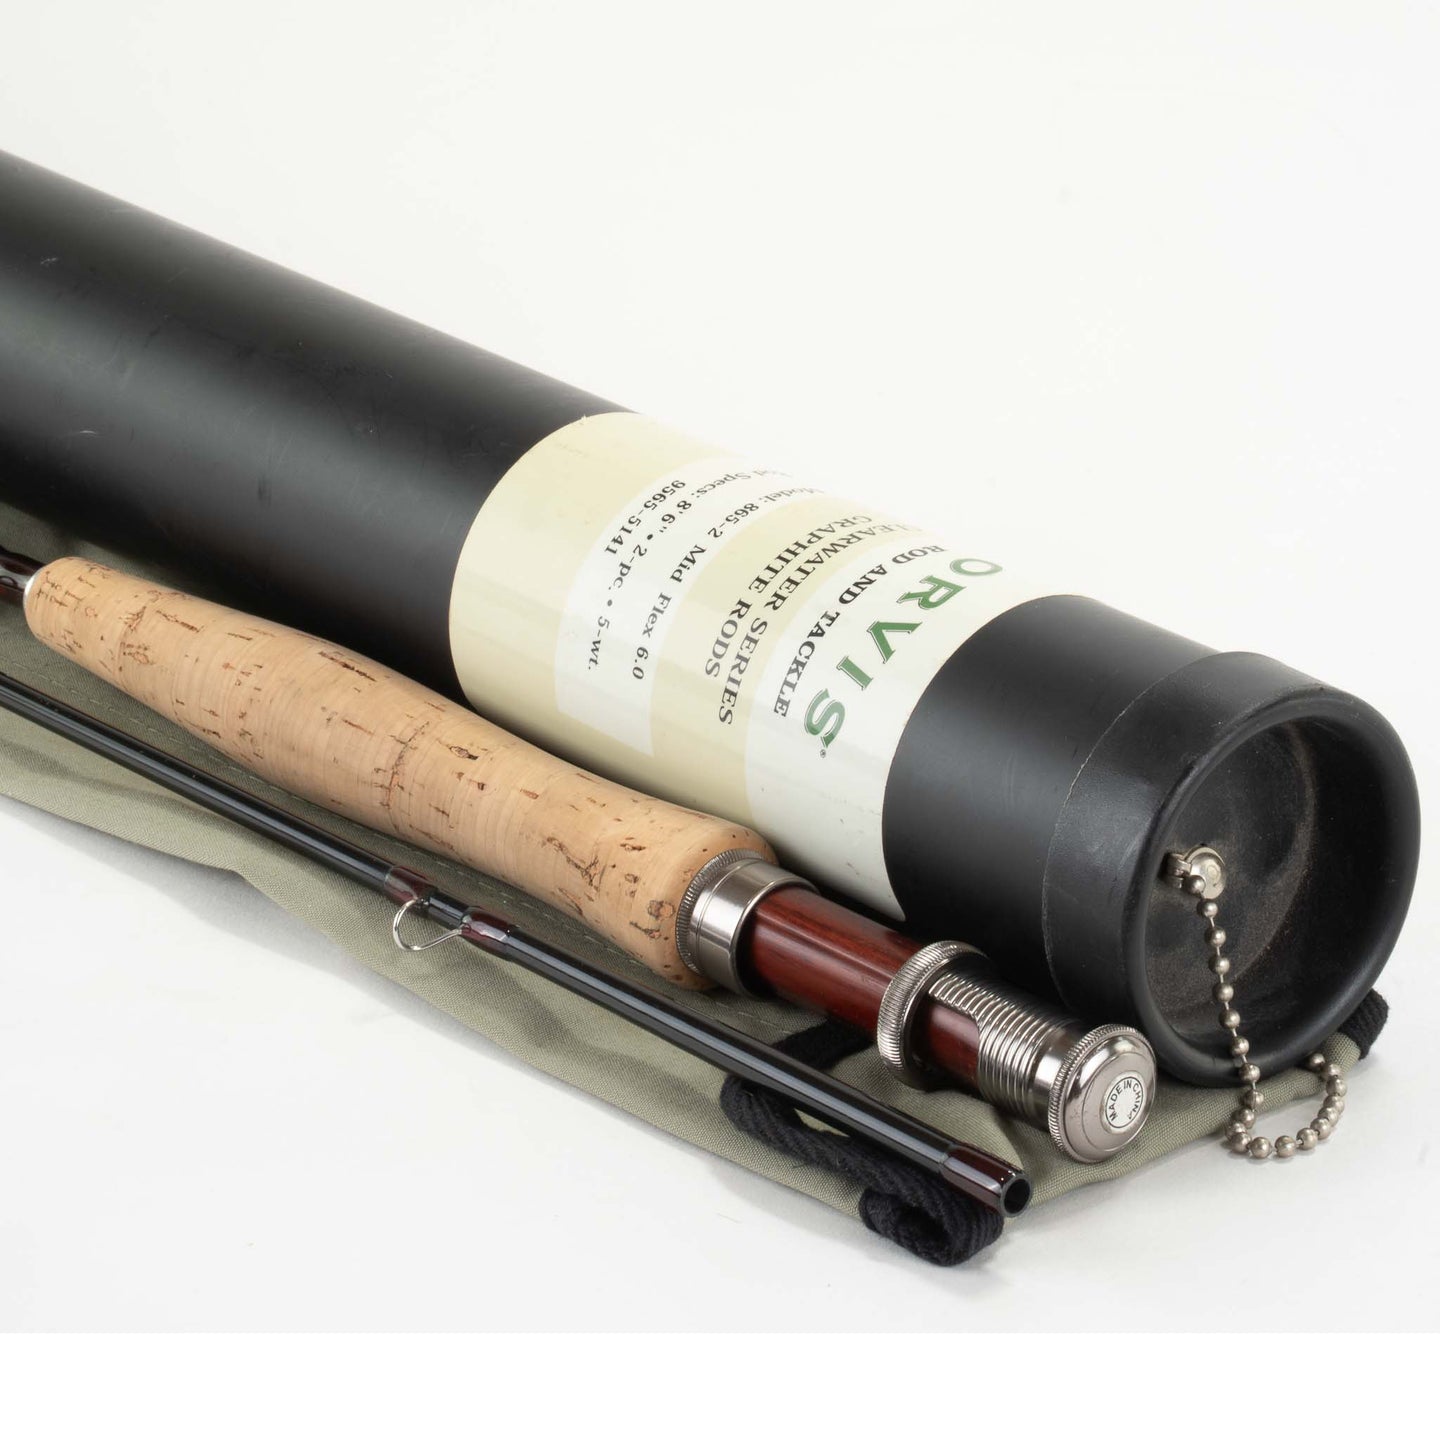 Orvis Clearwater 586-2 Fly Rod - 5wt 8ft 6in 2pc